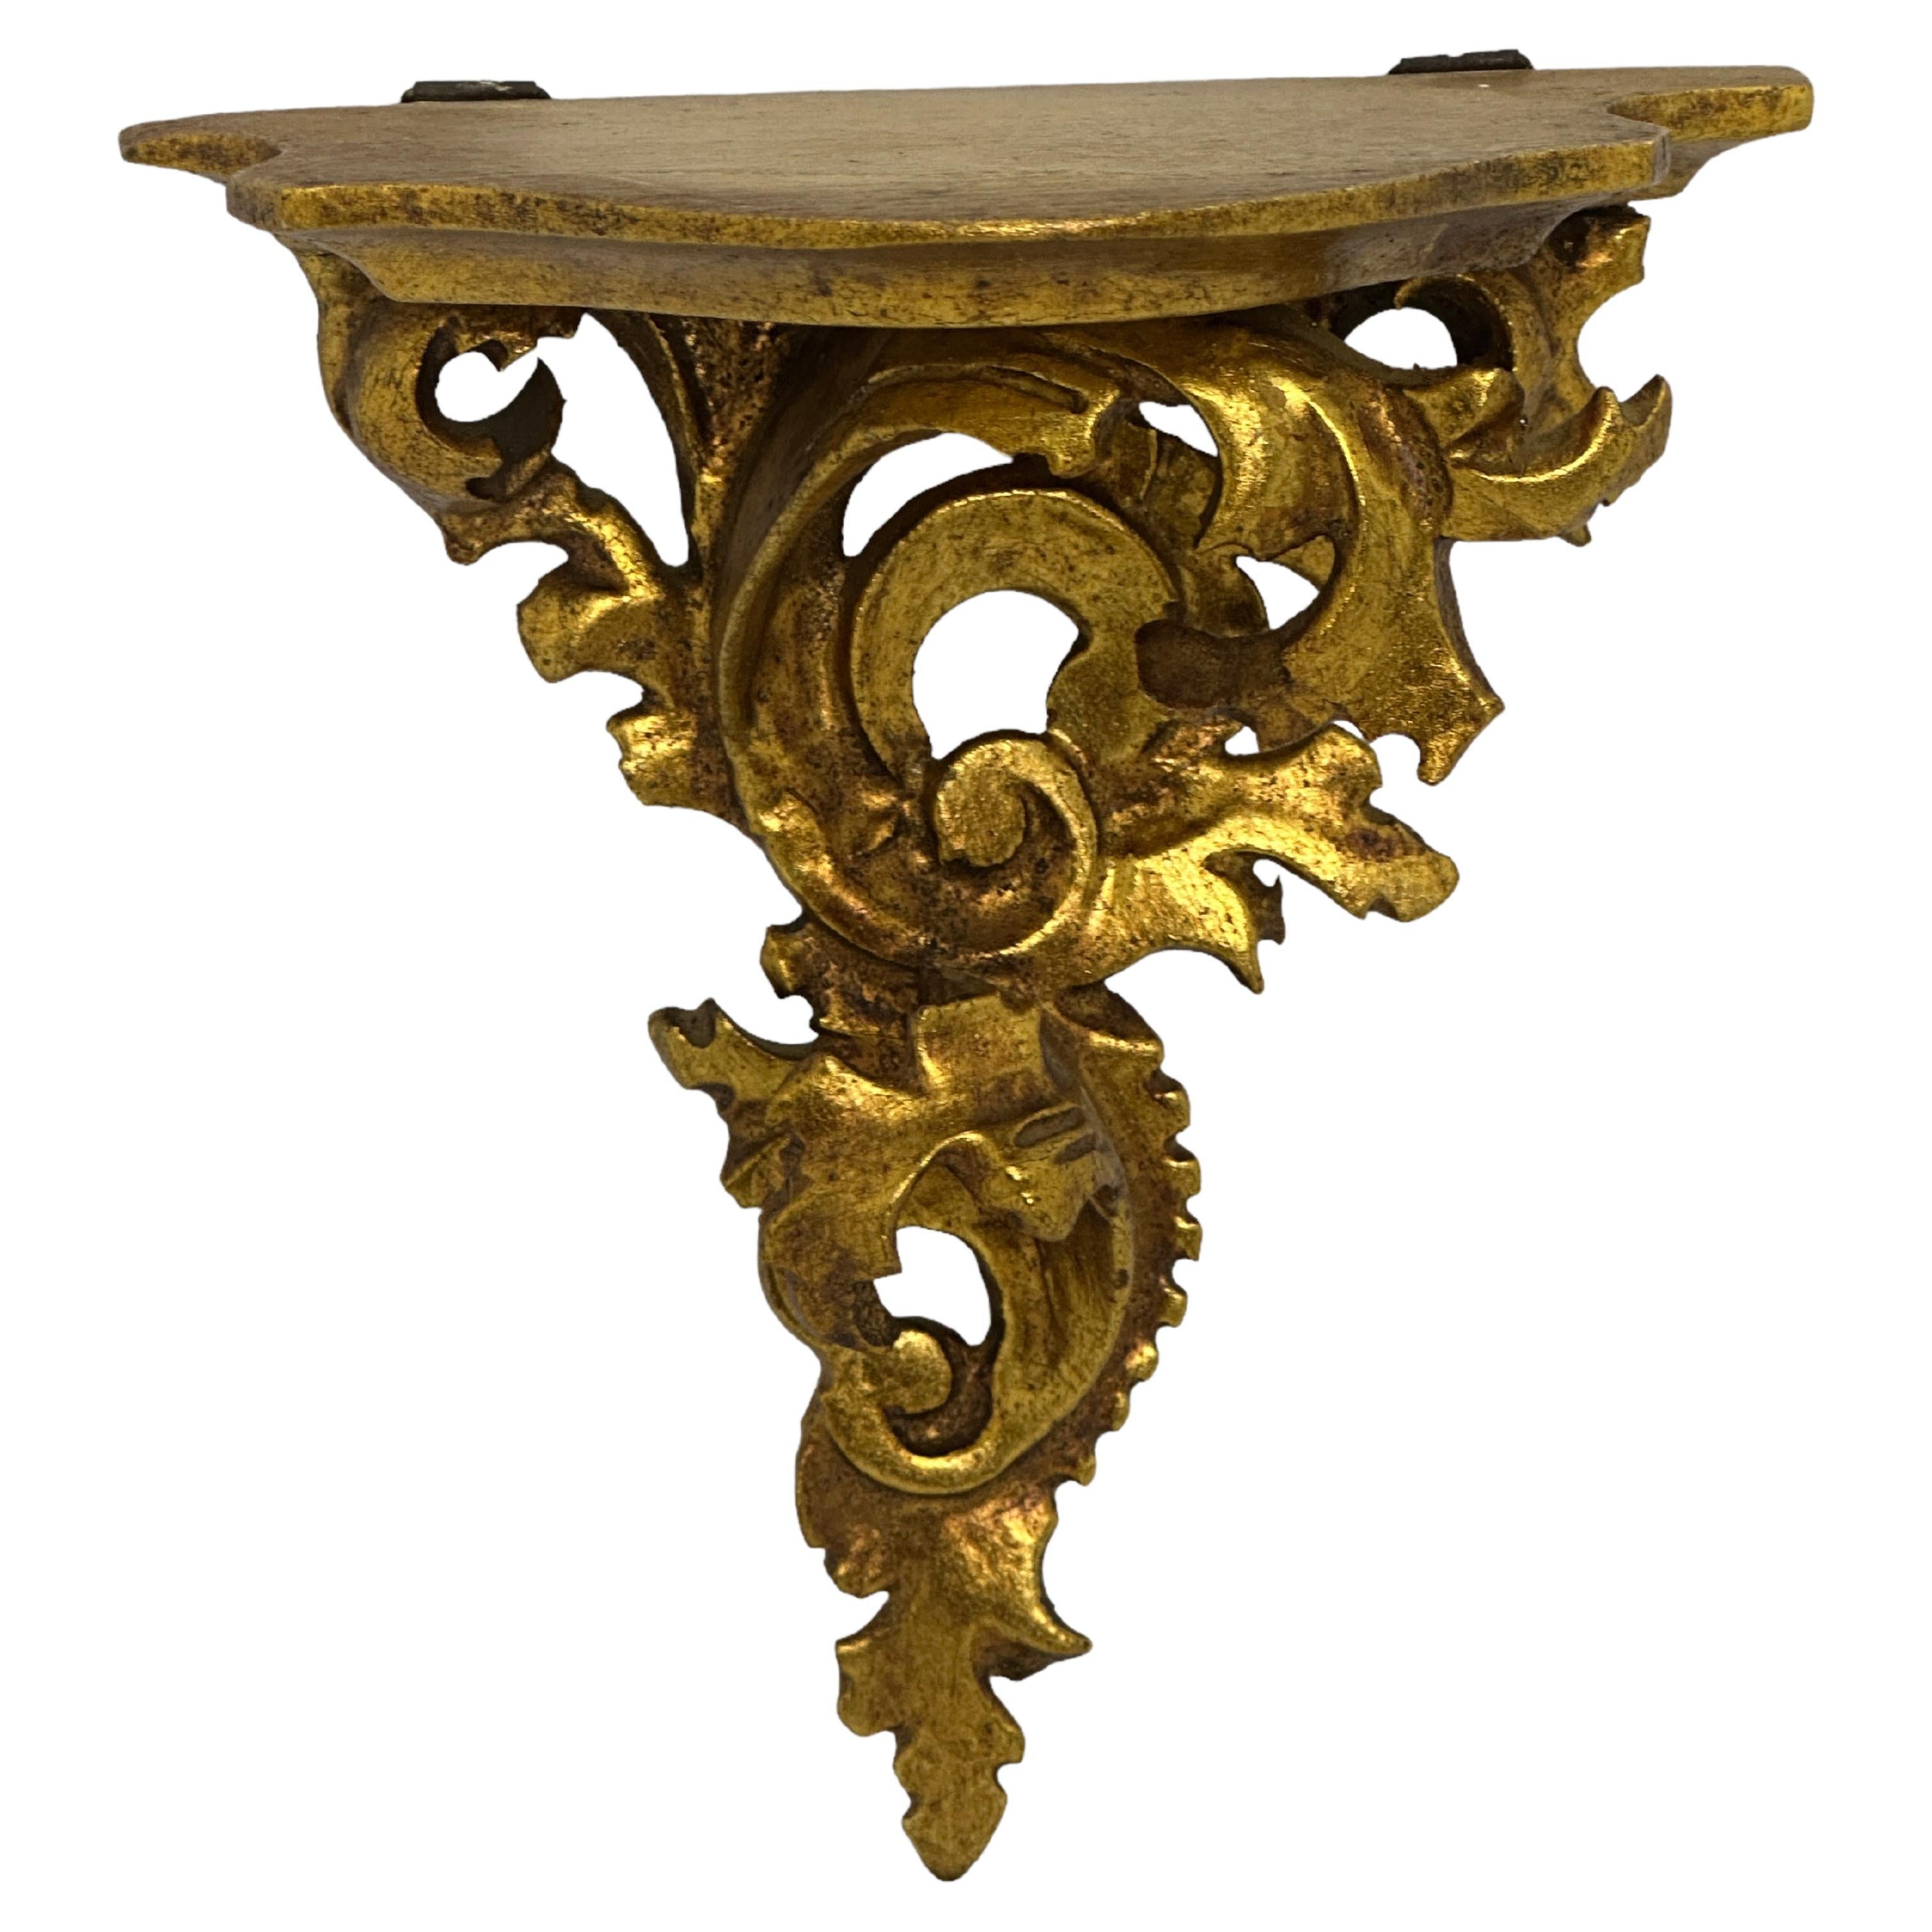 Italian Old Venetian Miniature Wall Shelf, Gilded Carved Acanthus, Rococo Style For Sale